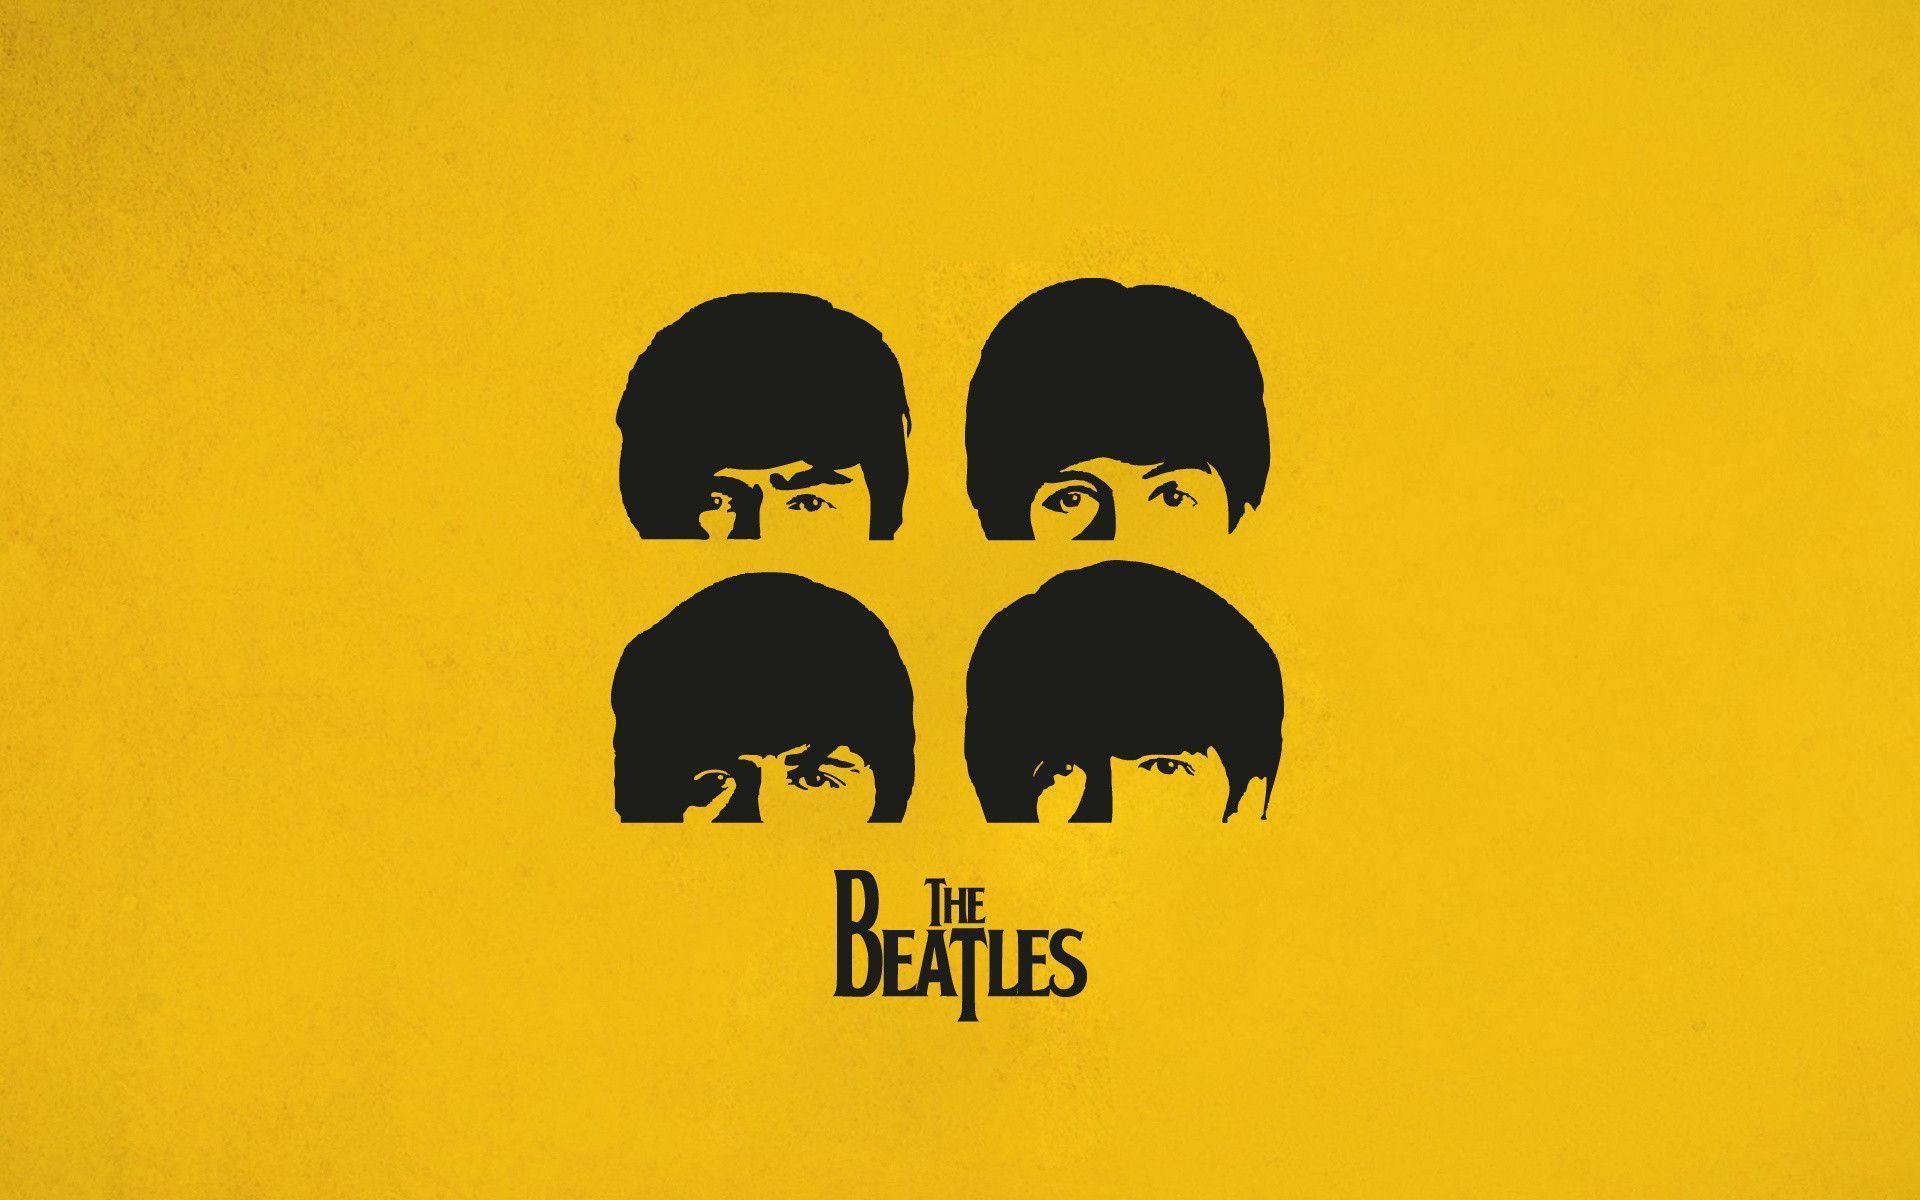 The Beatles Wallpaper. The Beatles Background